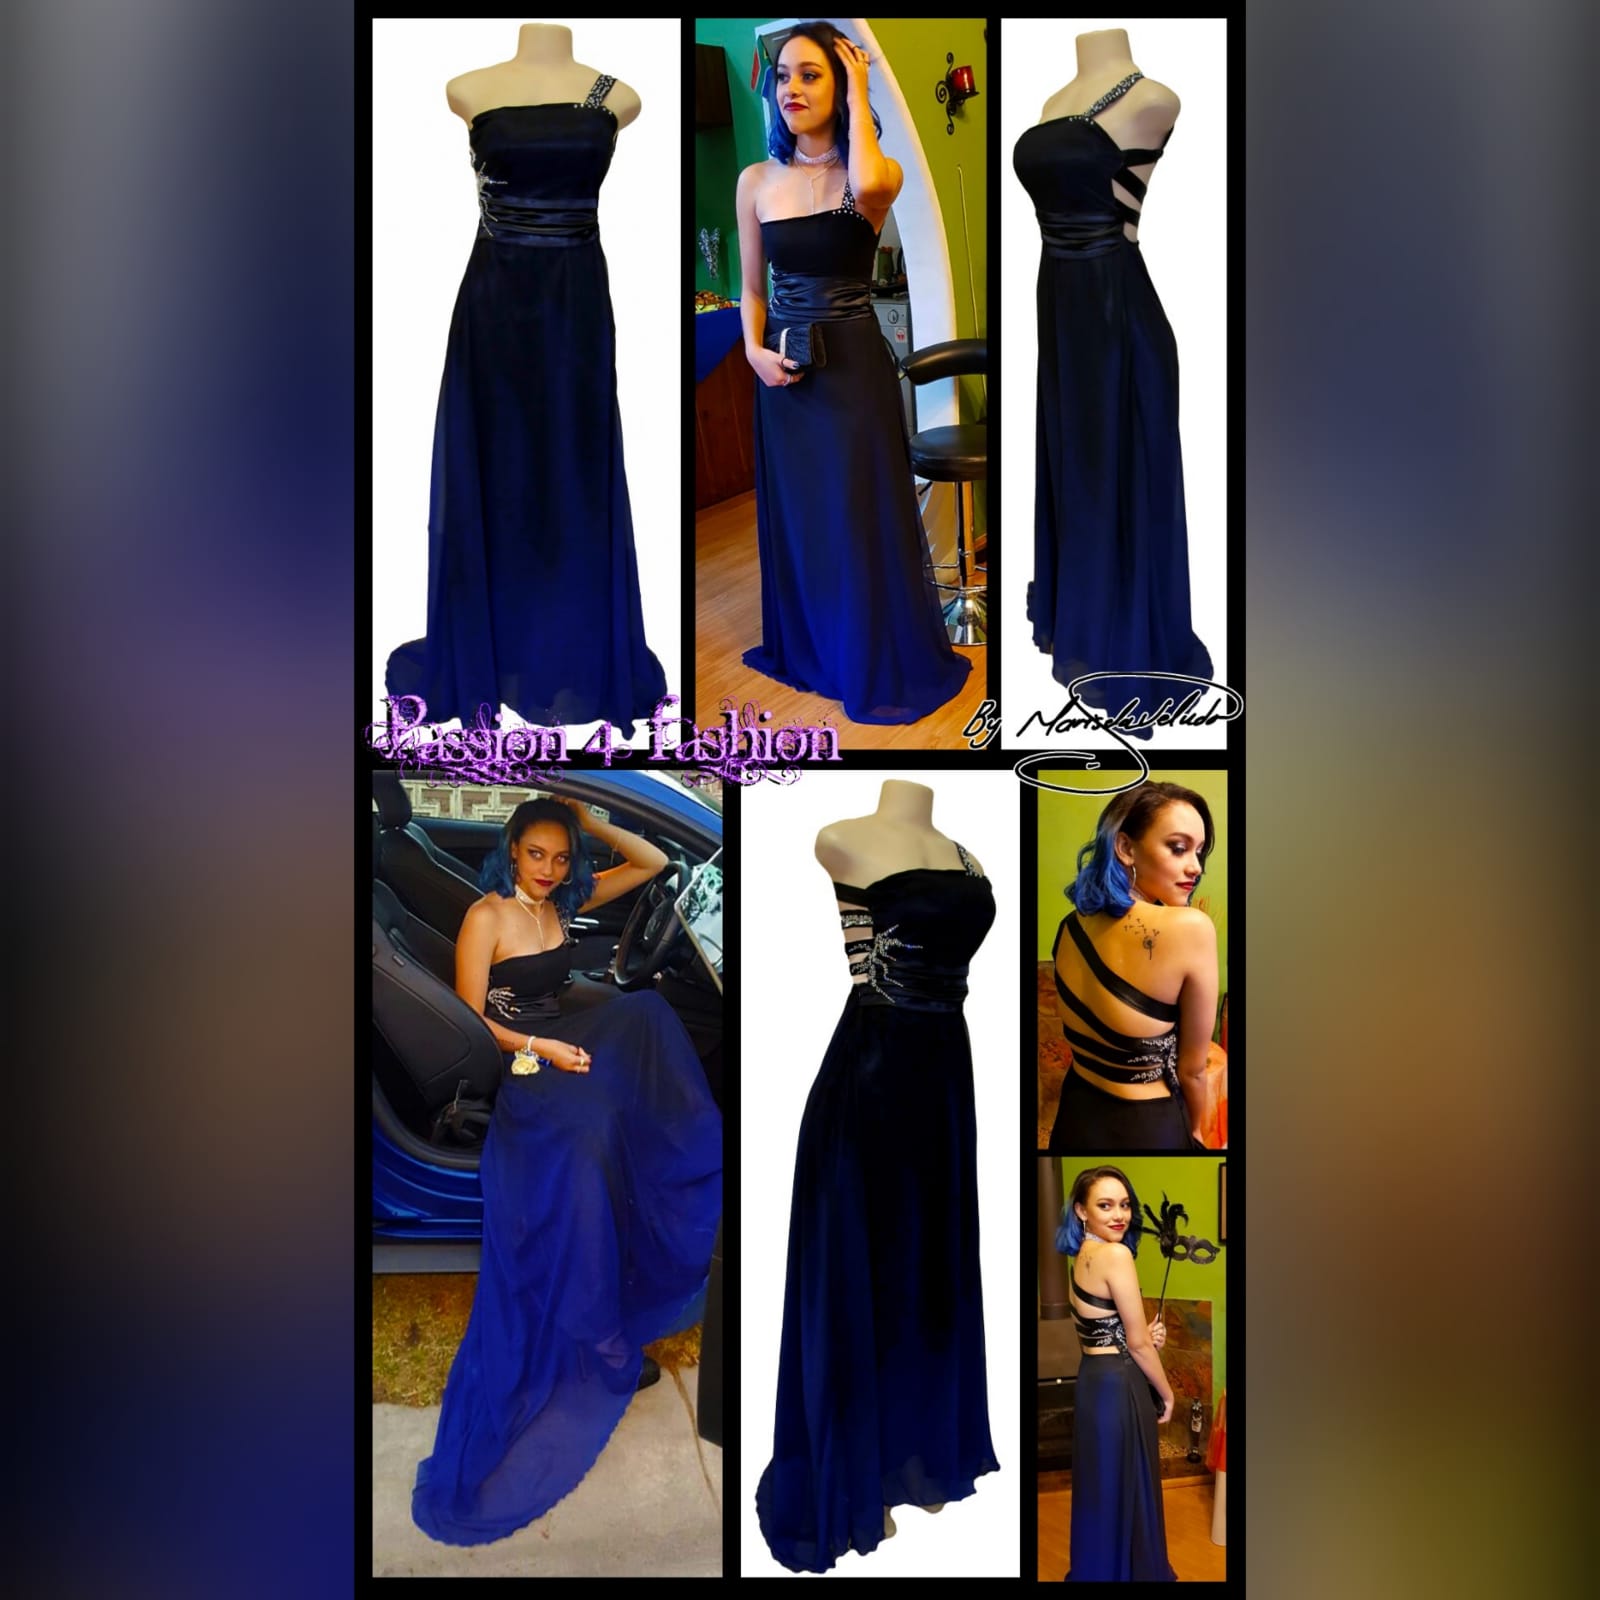 Black and royal blue flowy prom dress with a wide waist band 9 black and royal blue flowy prom dress with a wide waist band, an open back with strap design. With a train and silver detailing.